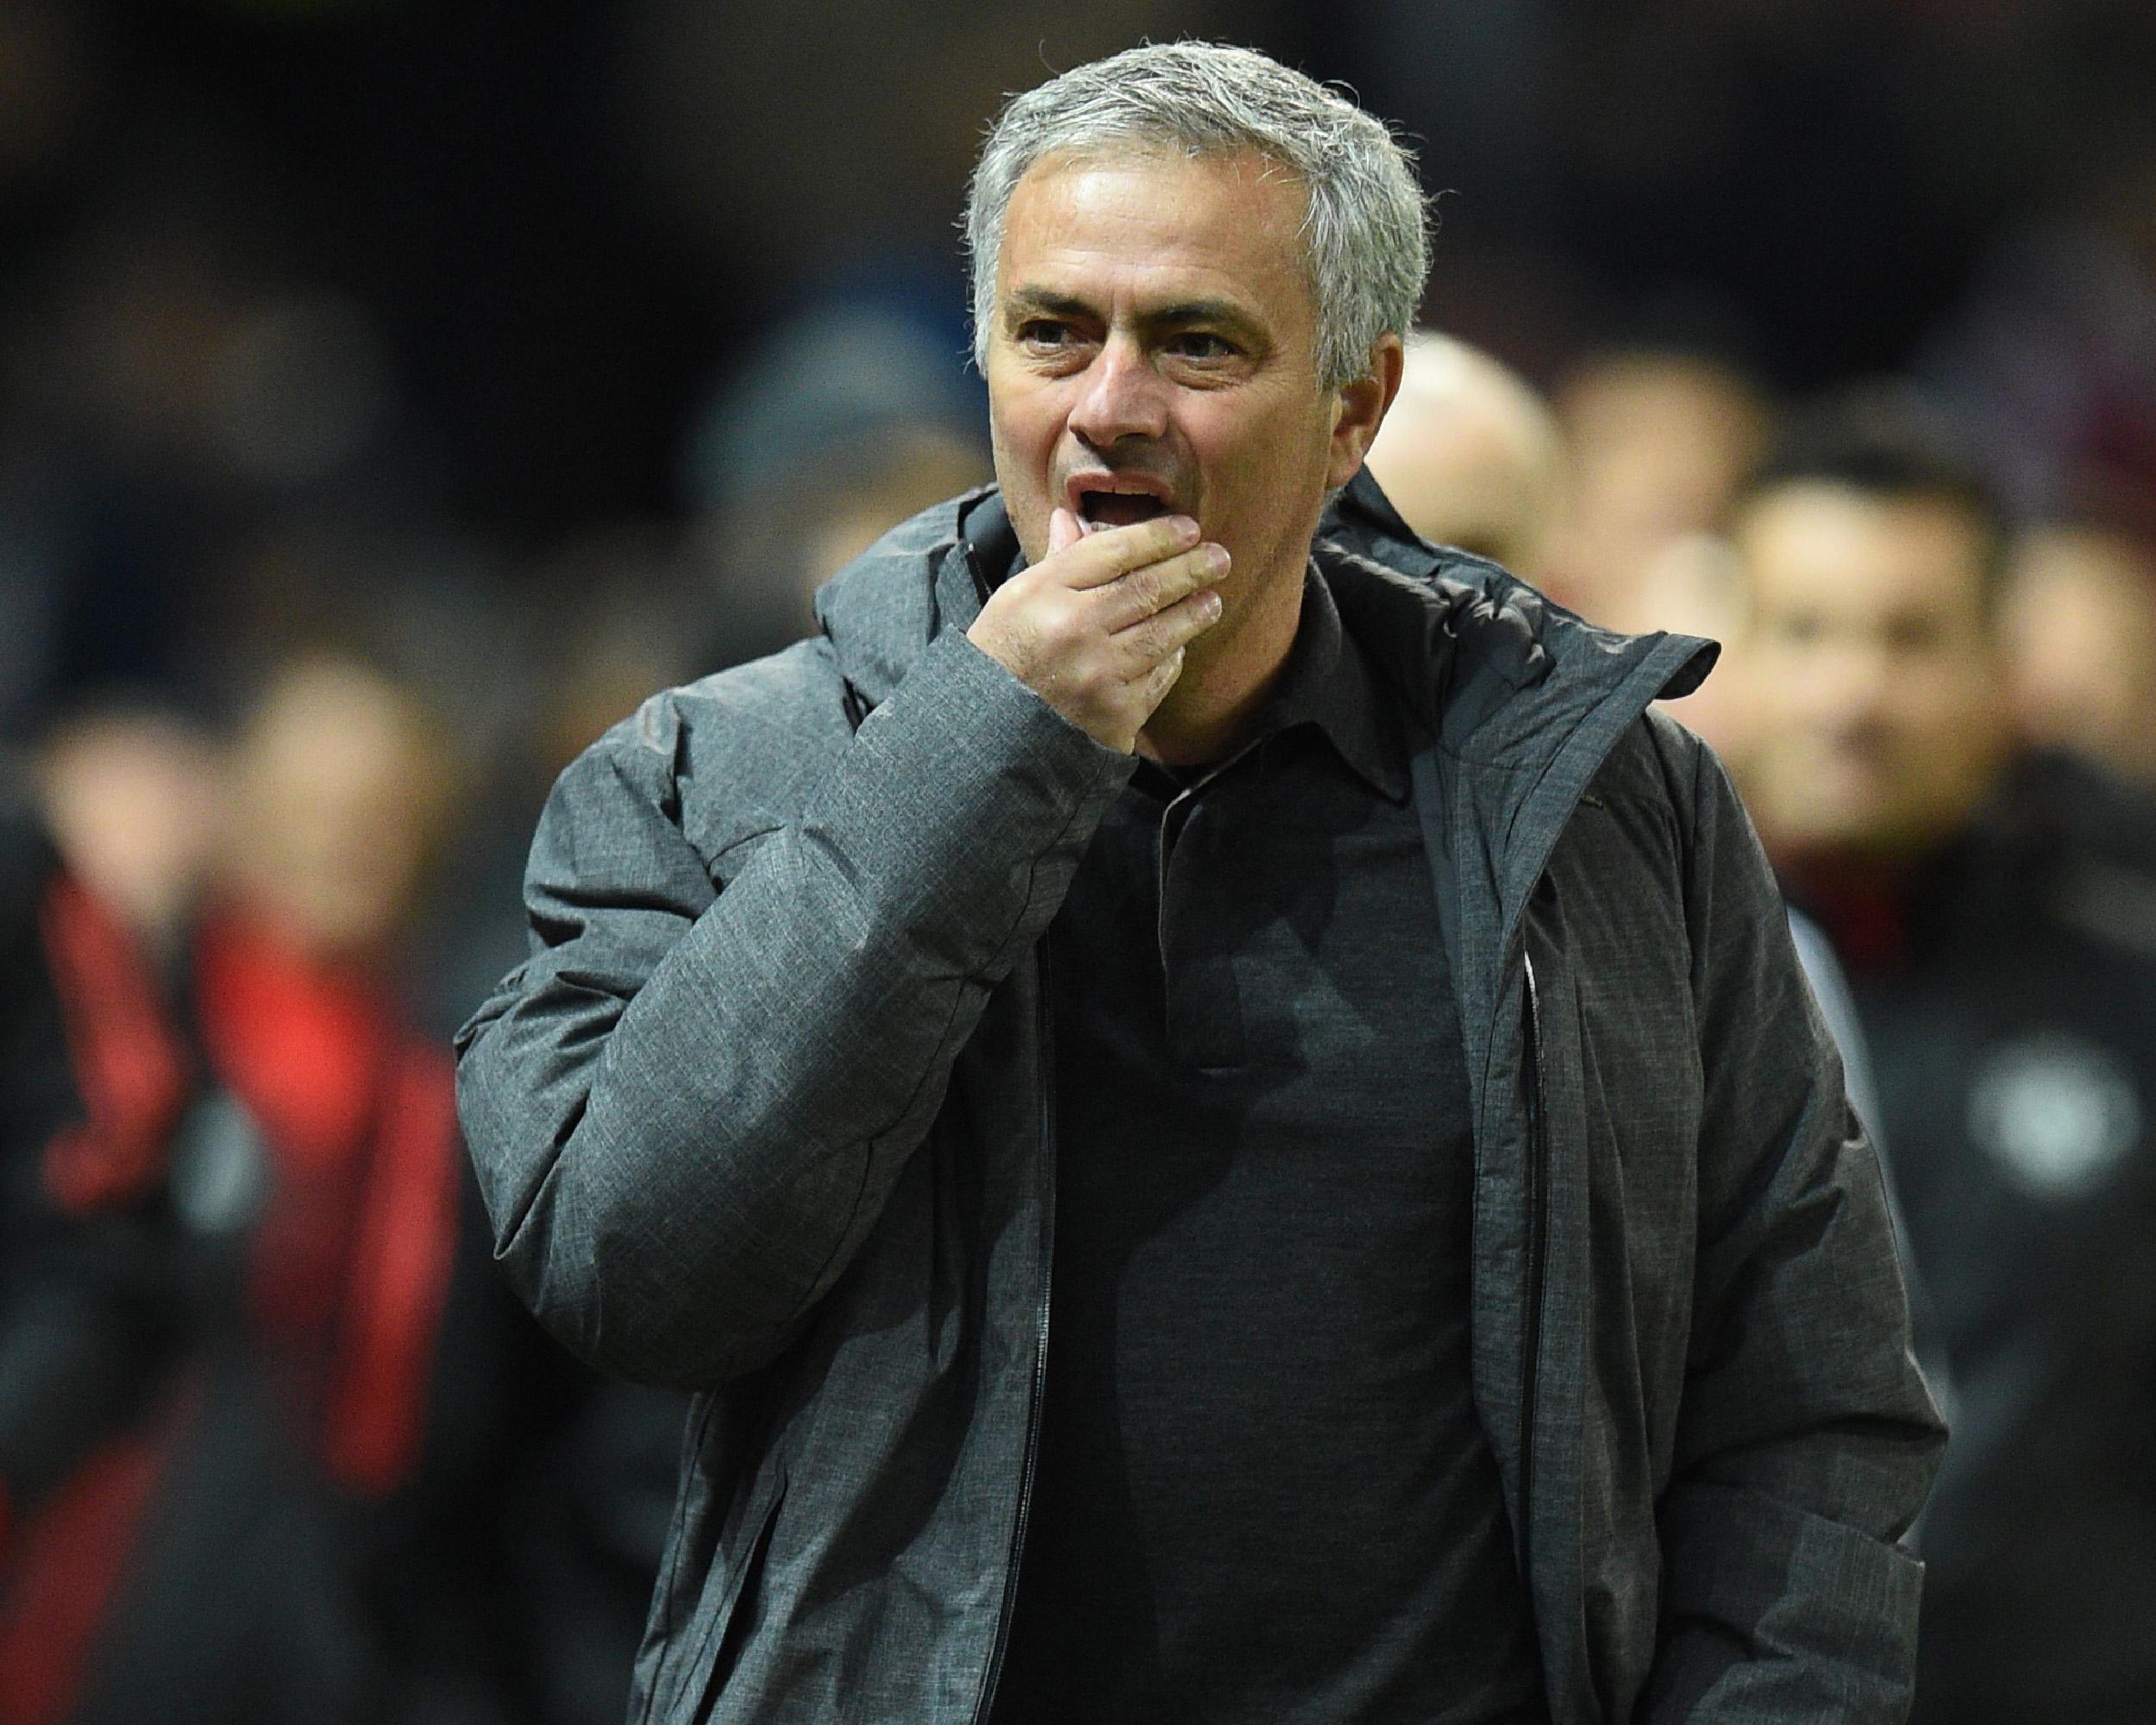 &#13;
(Mourinho could not hide his frustration with recent criticism Getty)&#13;